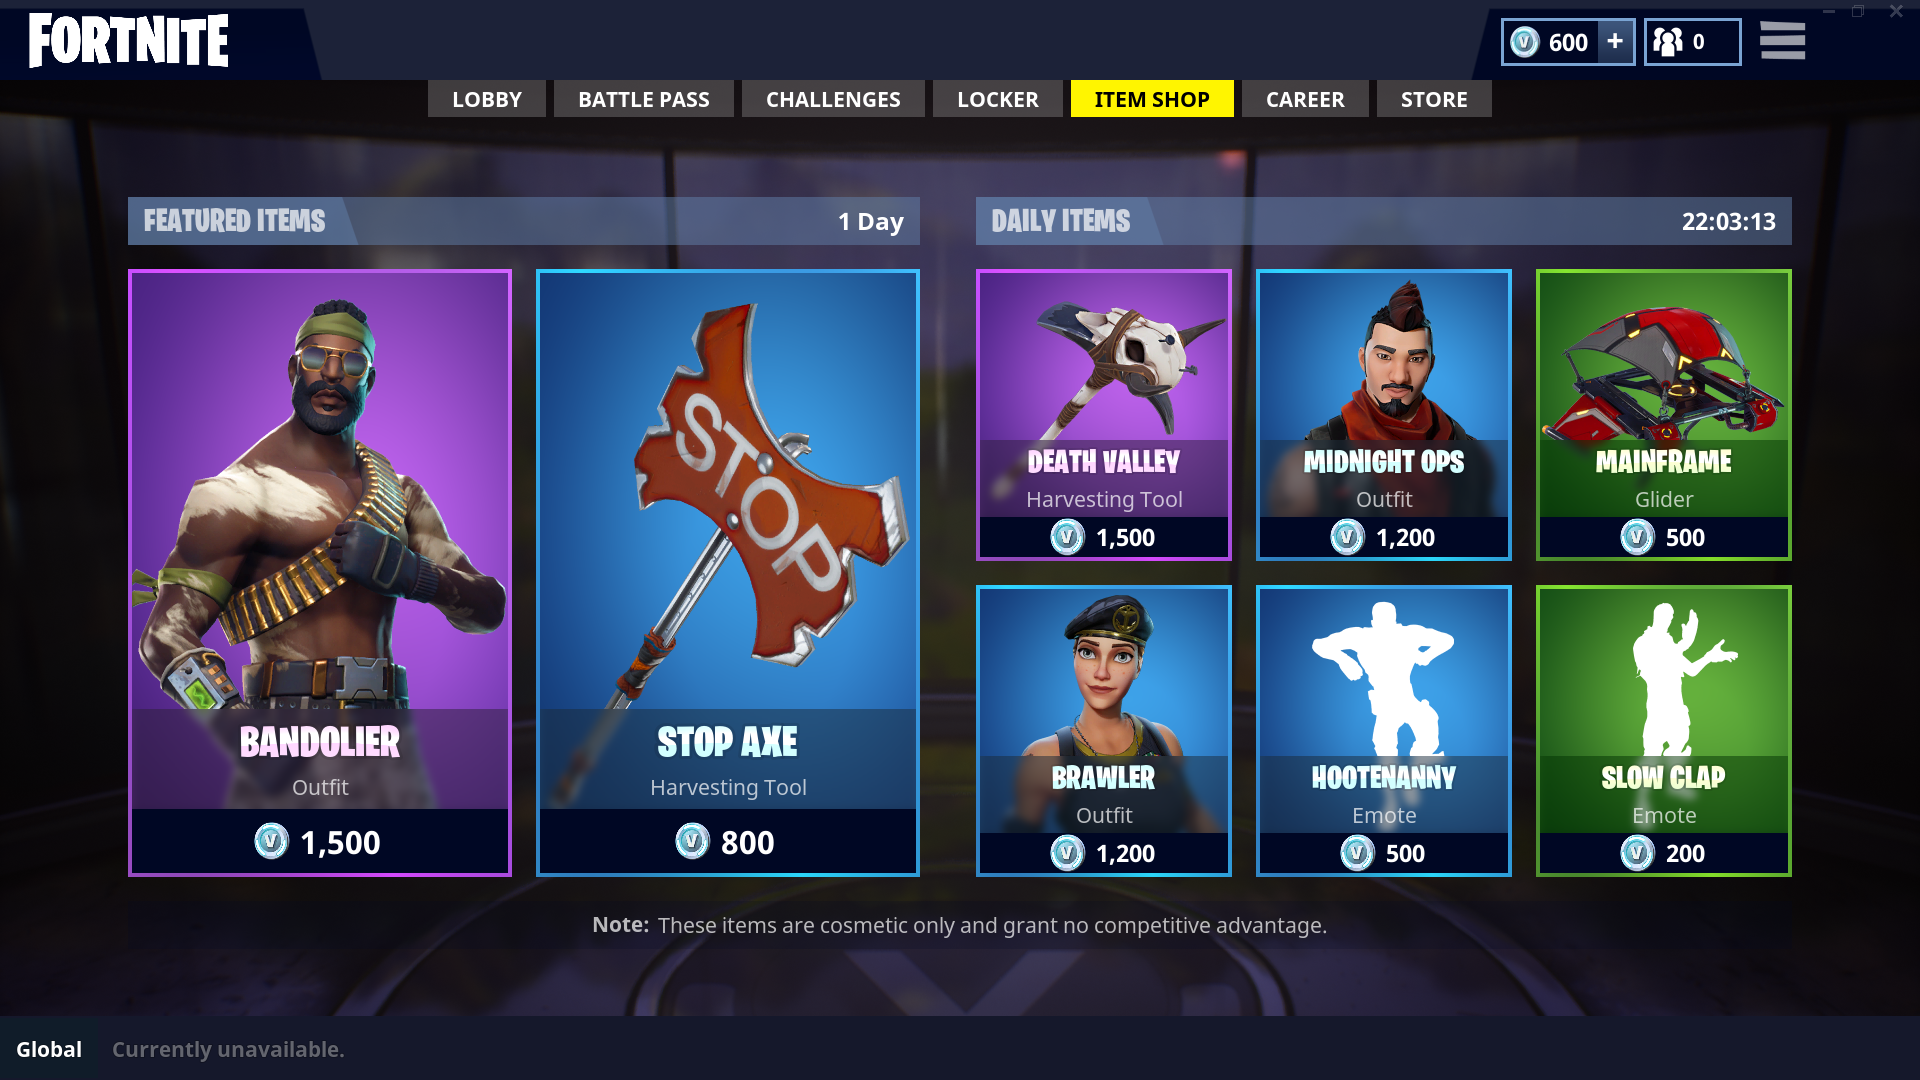 Fortnite' just added the Bandolier and Stop Axe to the Item Shop.